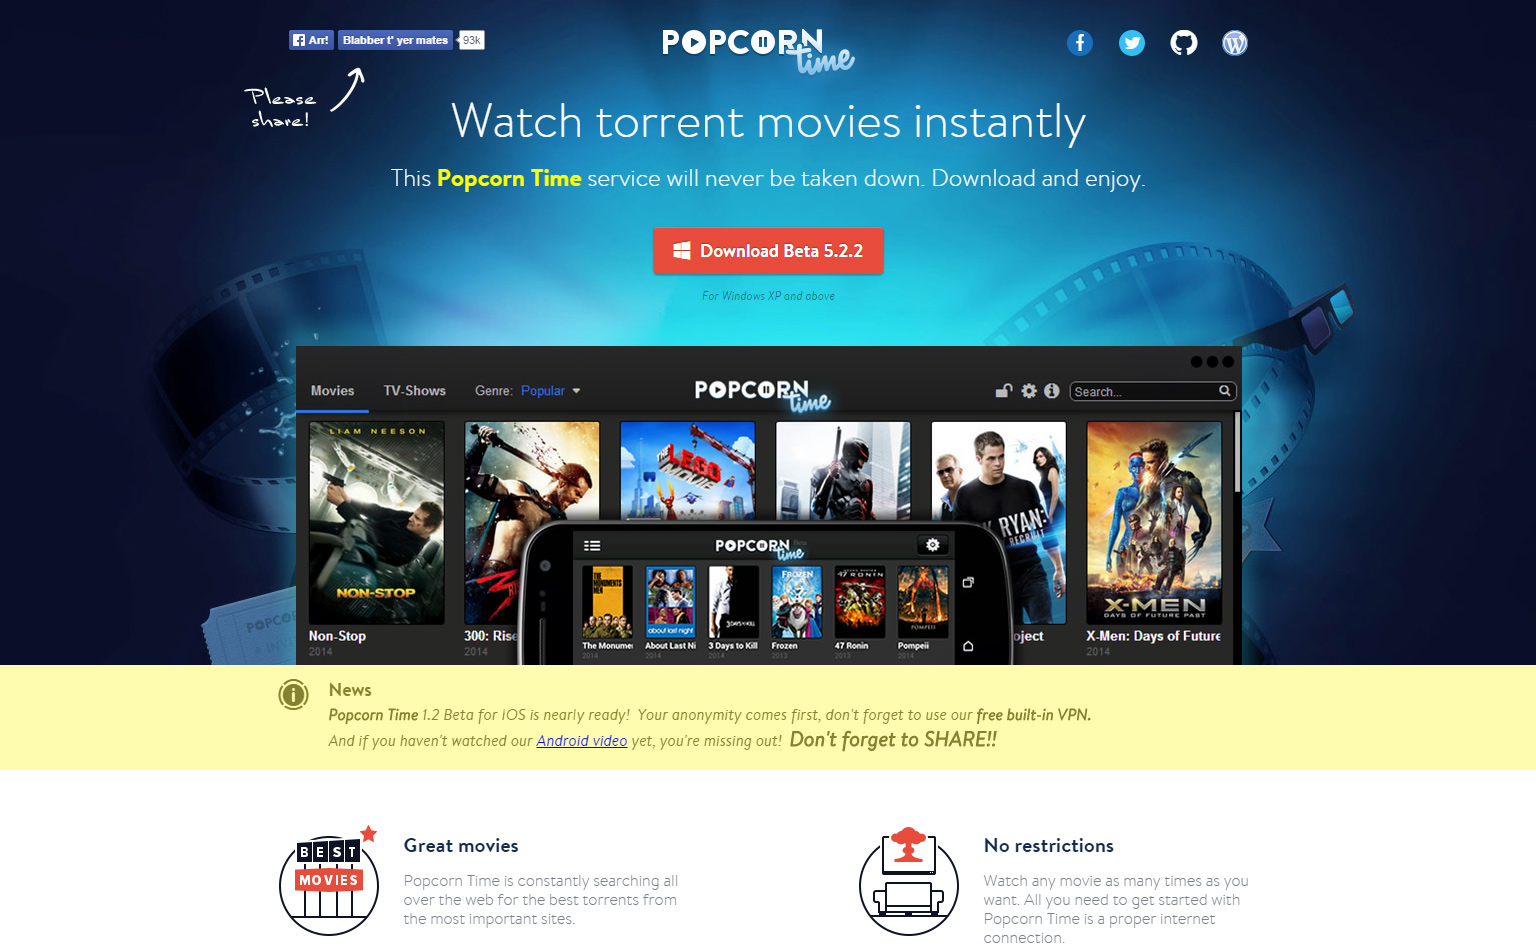 Popcorn Time users are facing lawsuits